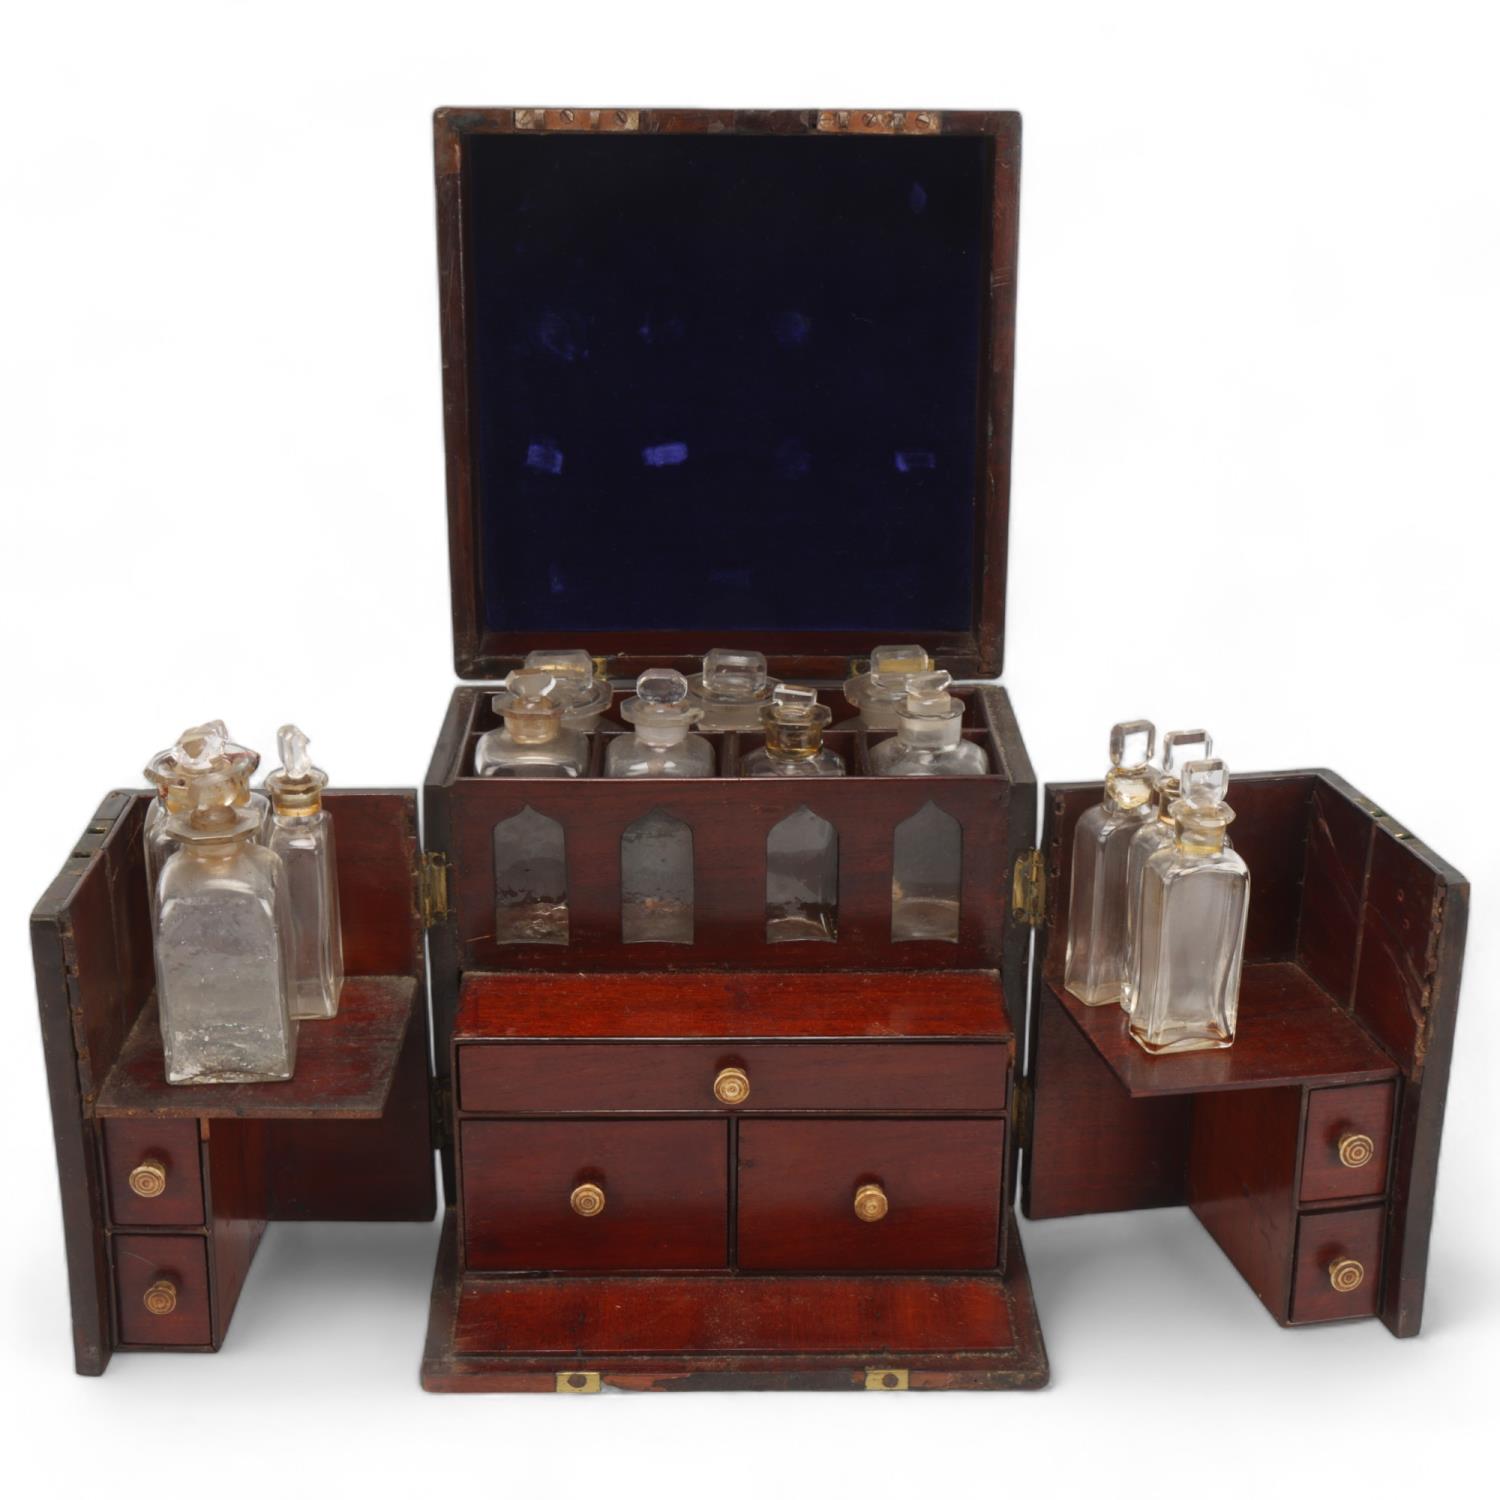 A 19th century brass-bound mahogany travelling apothecary cabinet, with hinged lid and doors opening